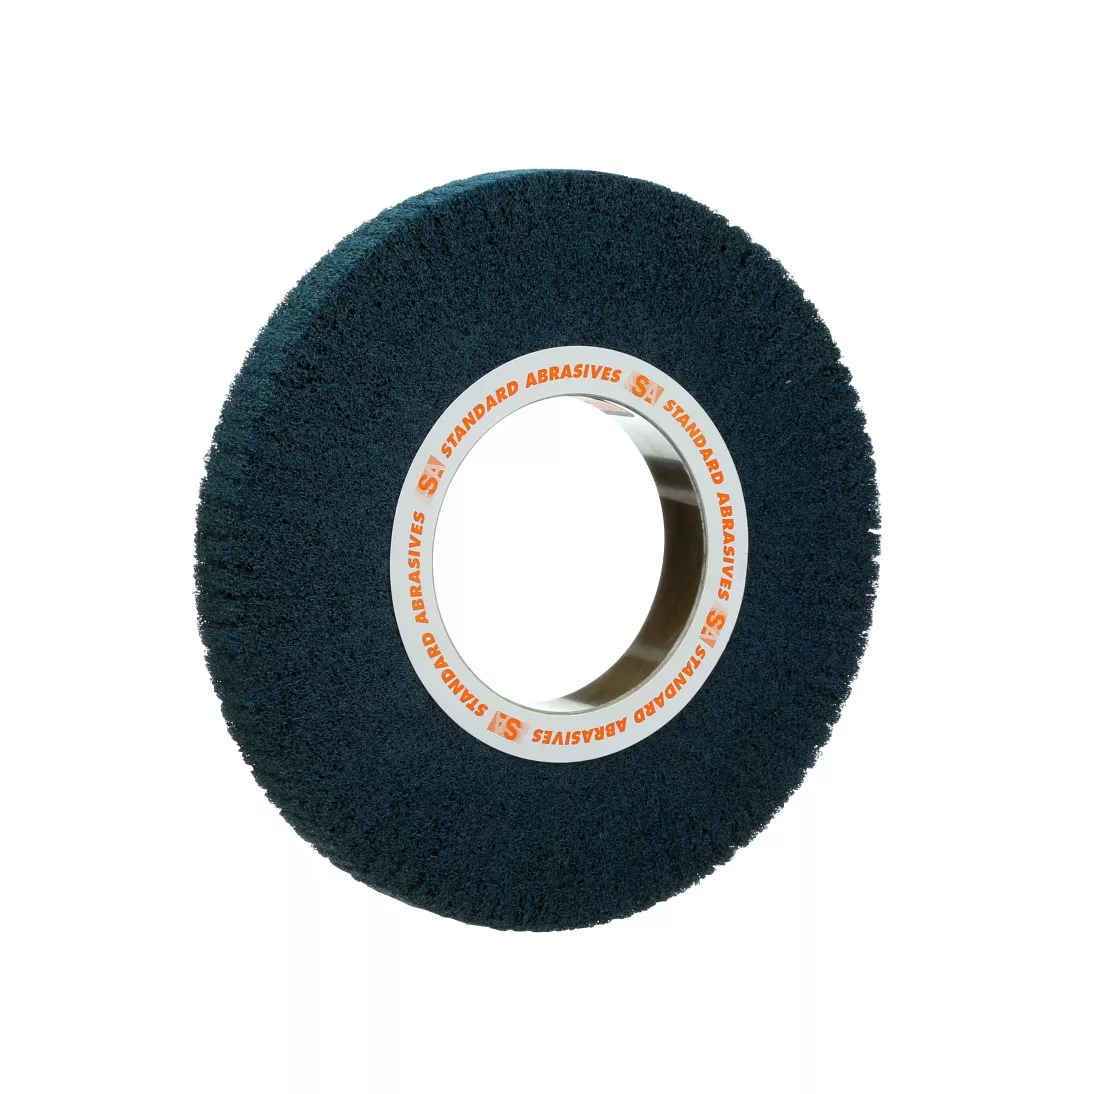 Standard Abrasives™ Buff and Blend HS Flap Brush 875371, 14 in x 1-1/2
in x 8 in FB119 23-11 HD A MED, 3 ea/Case